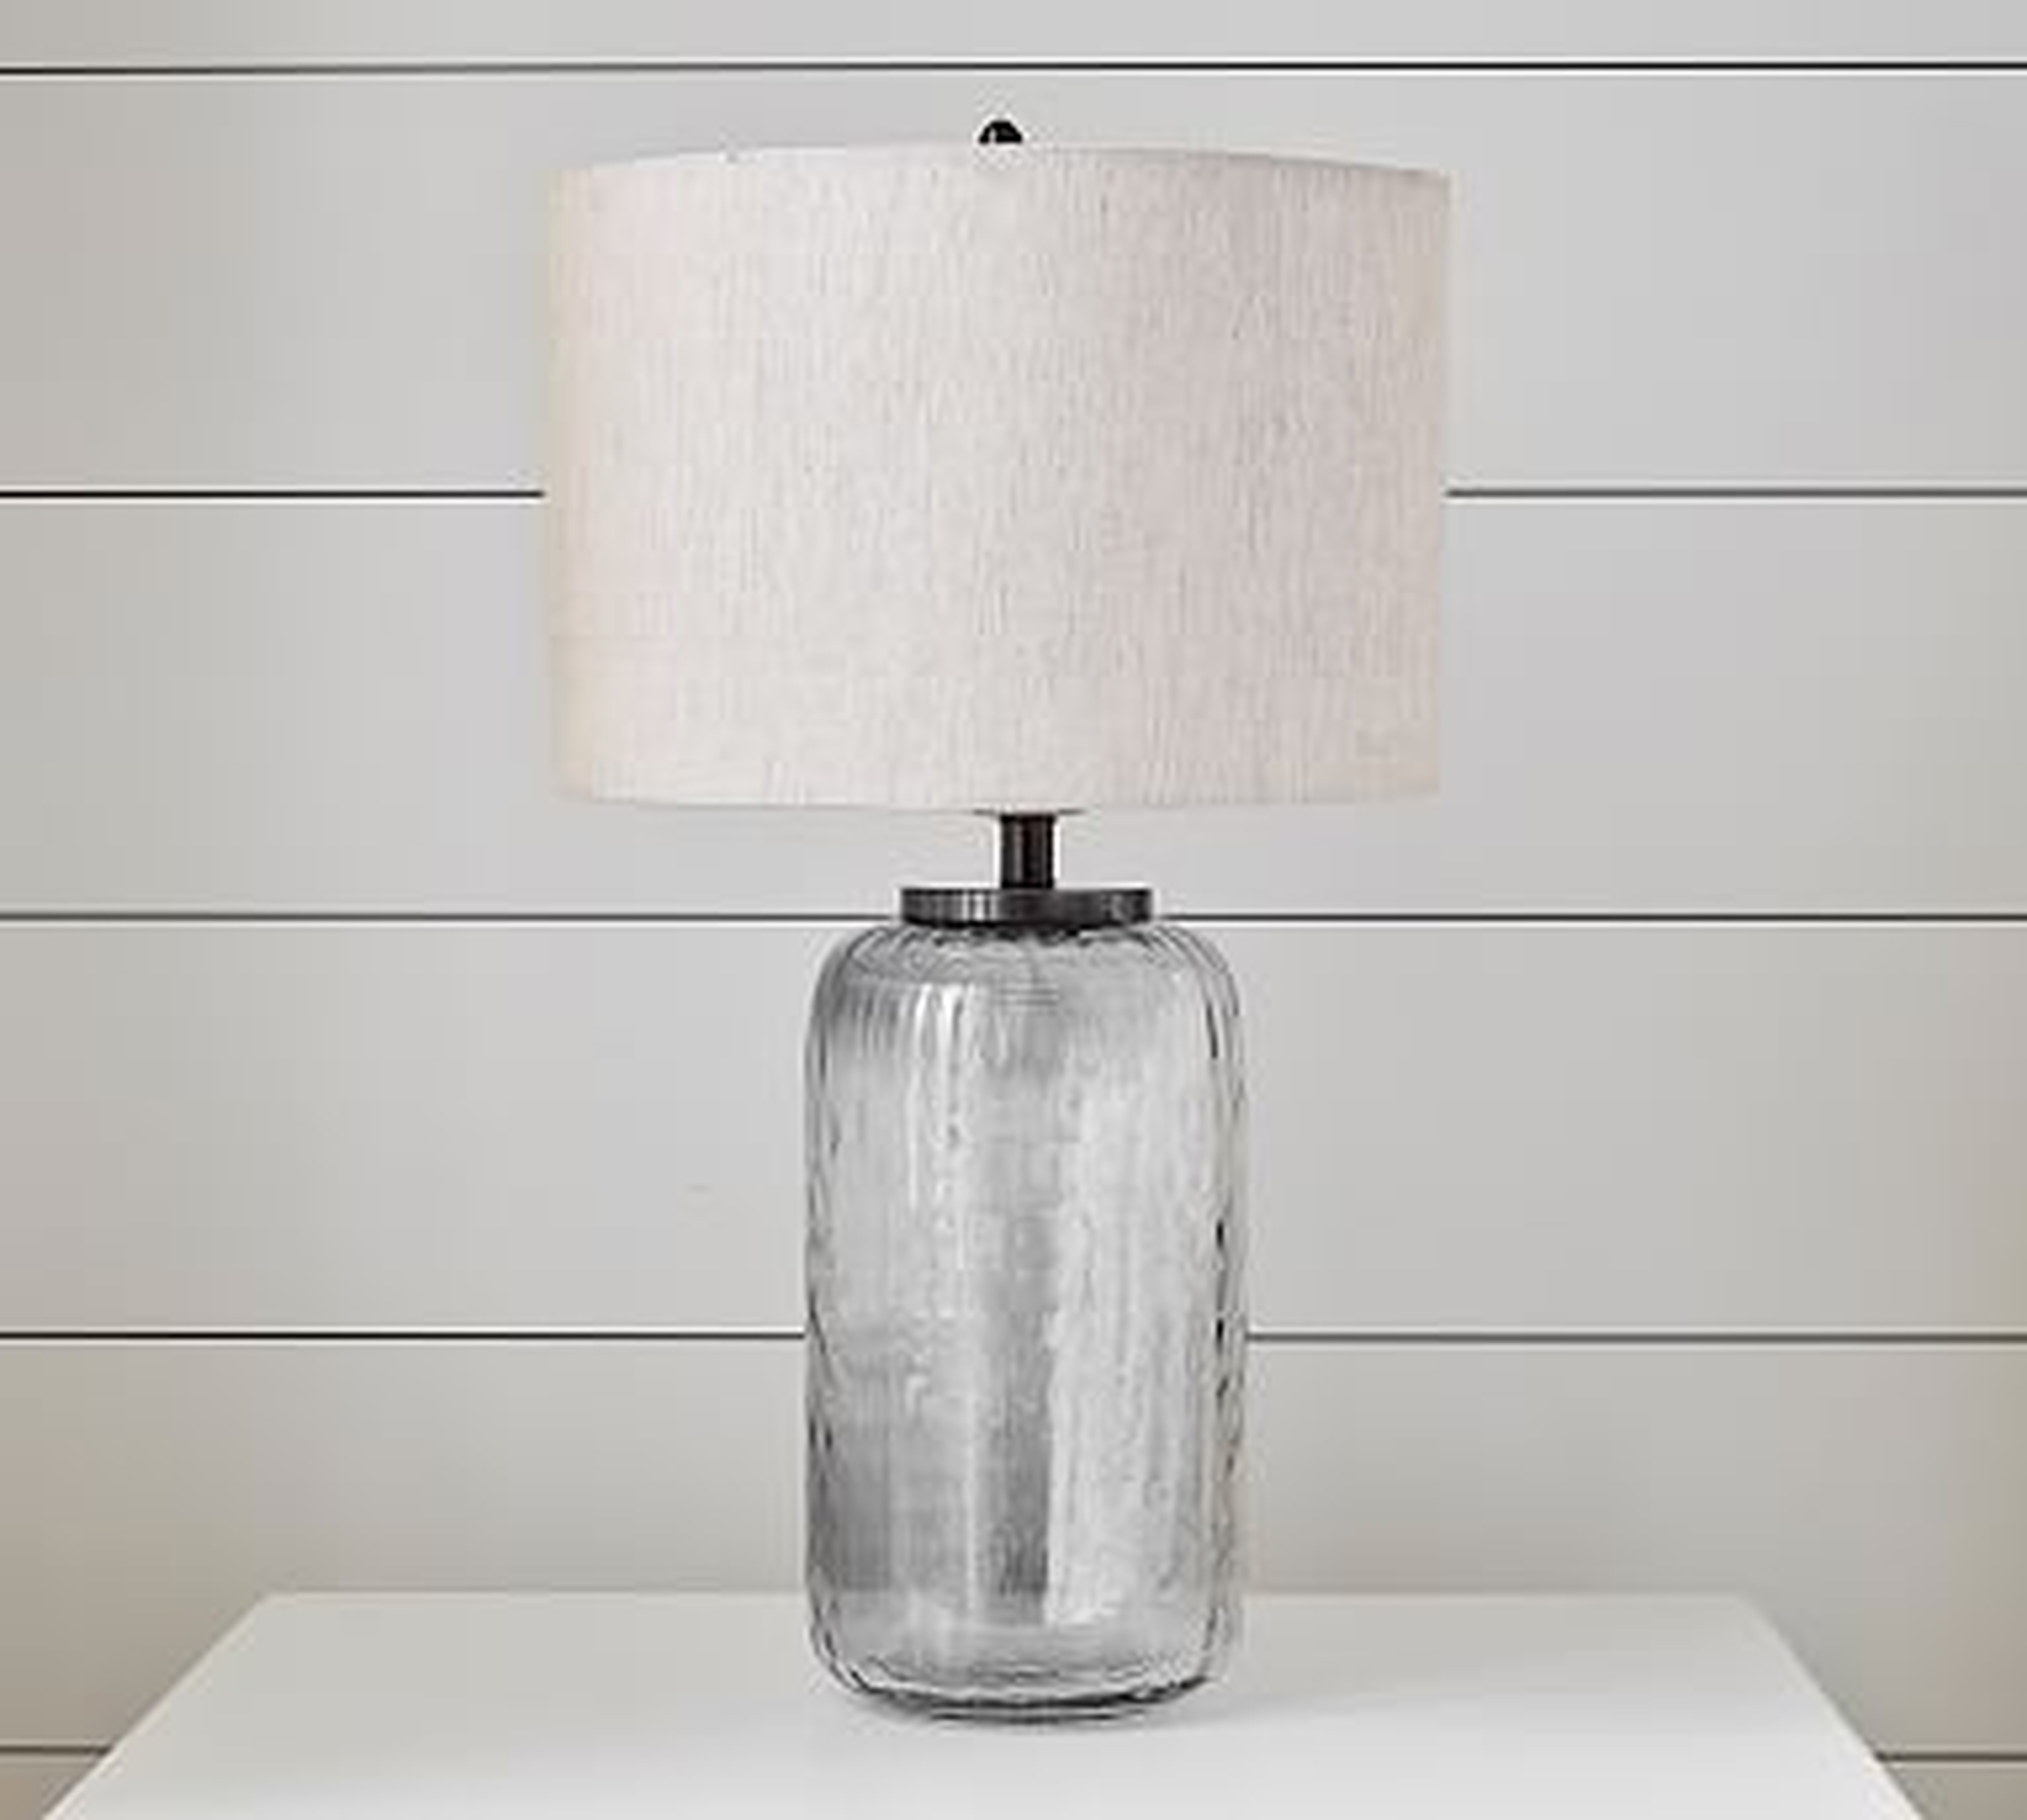 Alana Luster Glass Cylinder Table Lamp, Small - Pottery Barn